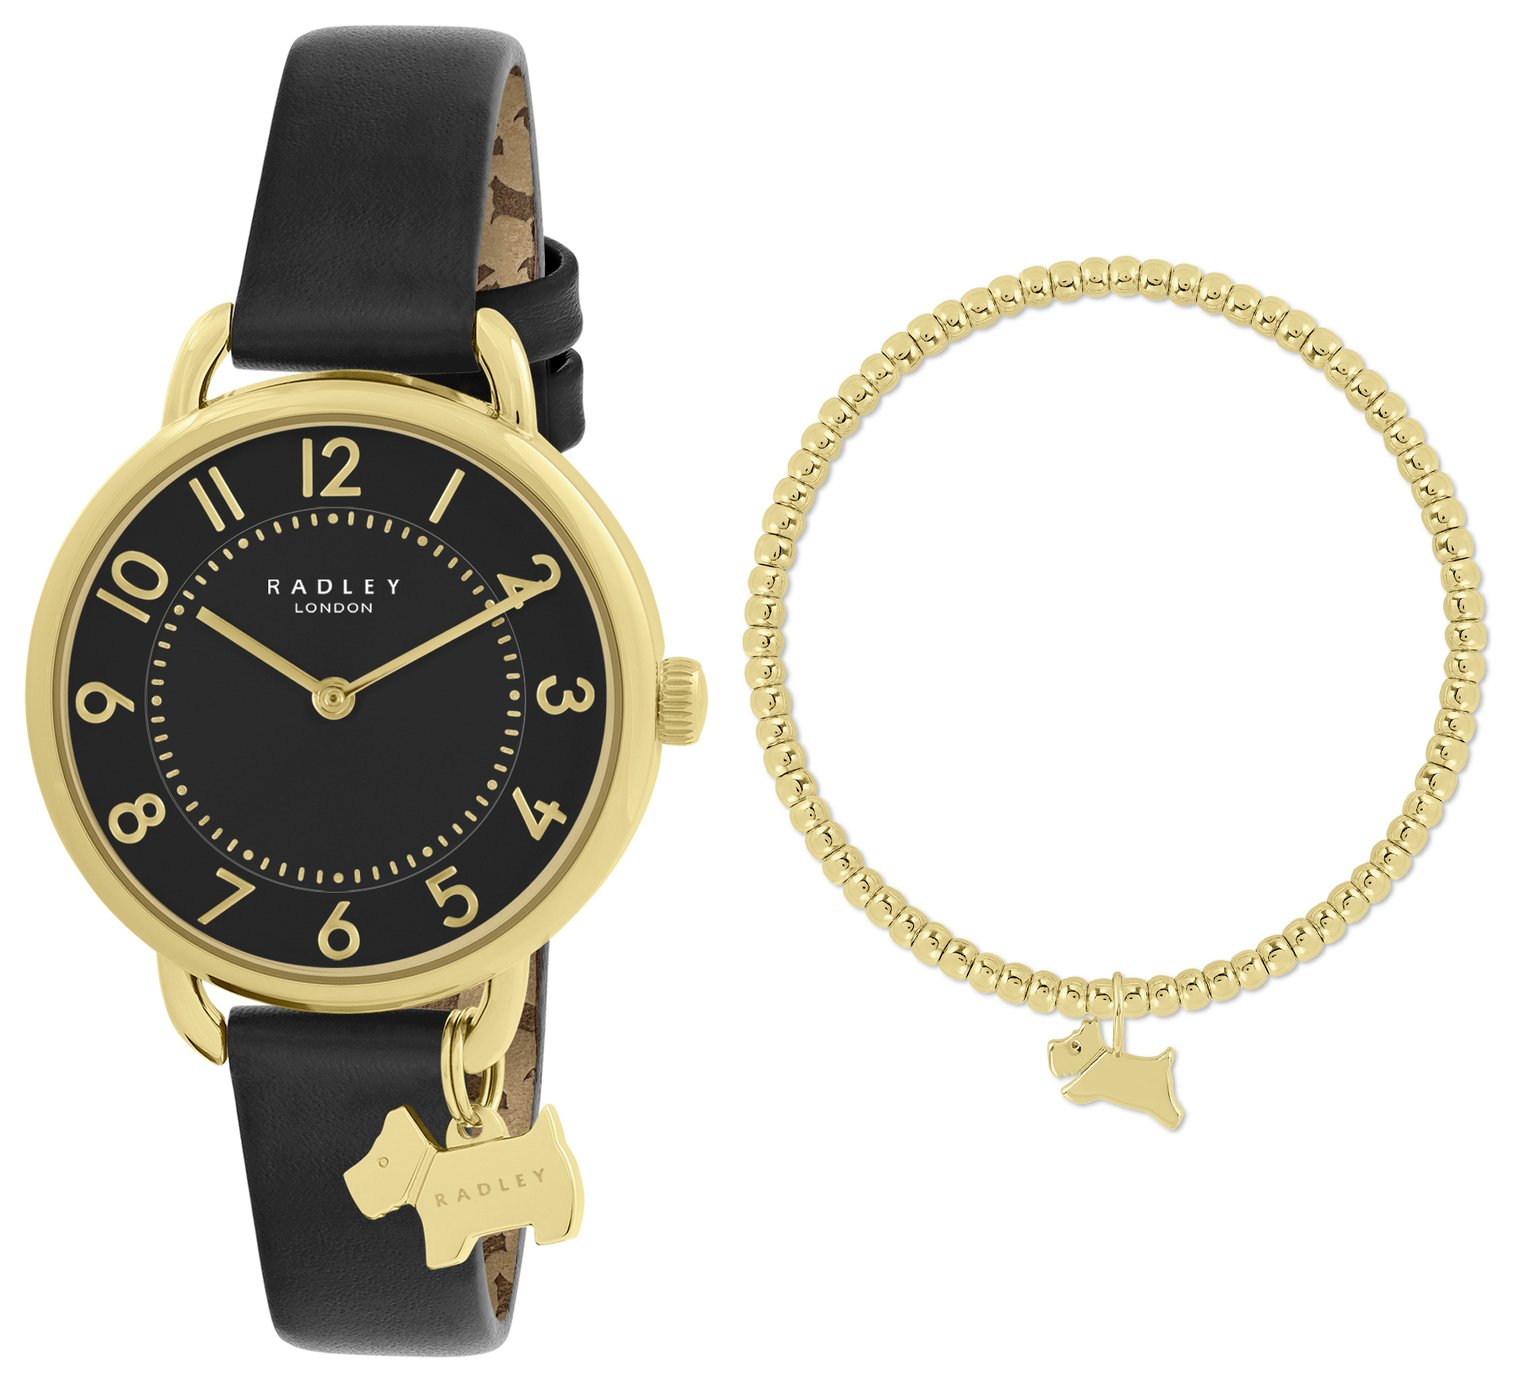 Radley Black Leather Strap Watch and Gold Bangle Gift Set